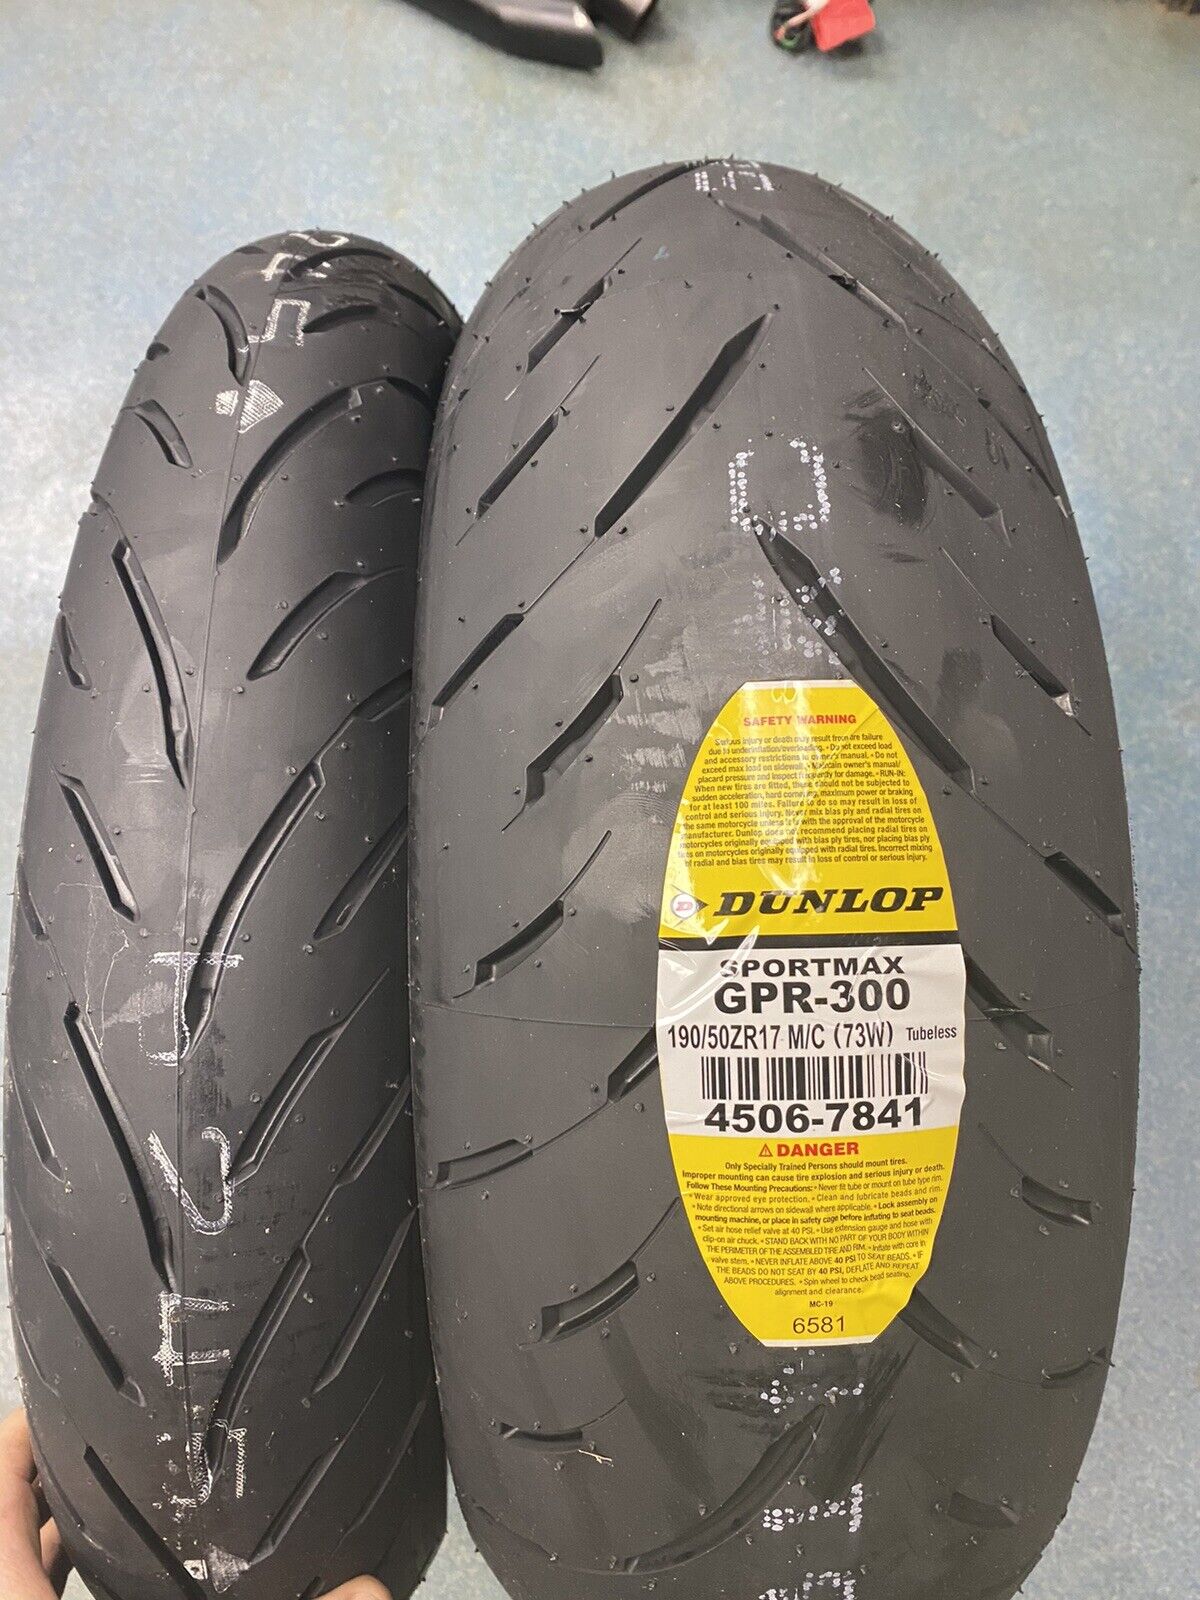 Dunlop GPR-300 front and rear tires, 120/70/17 and 190/50/17 NEW